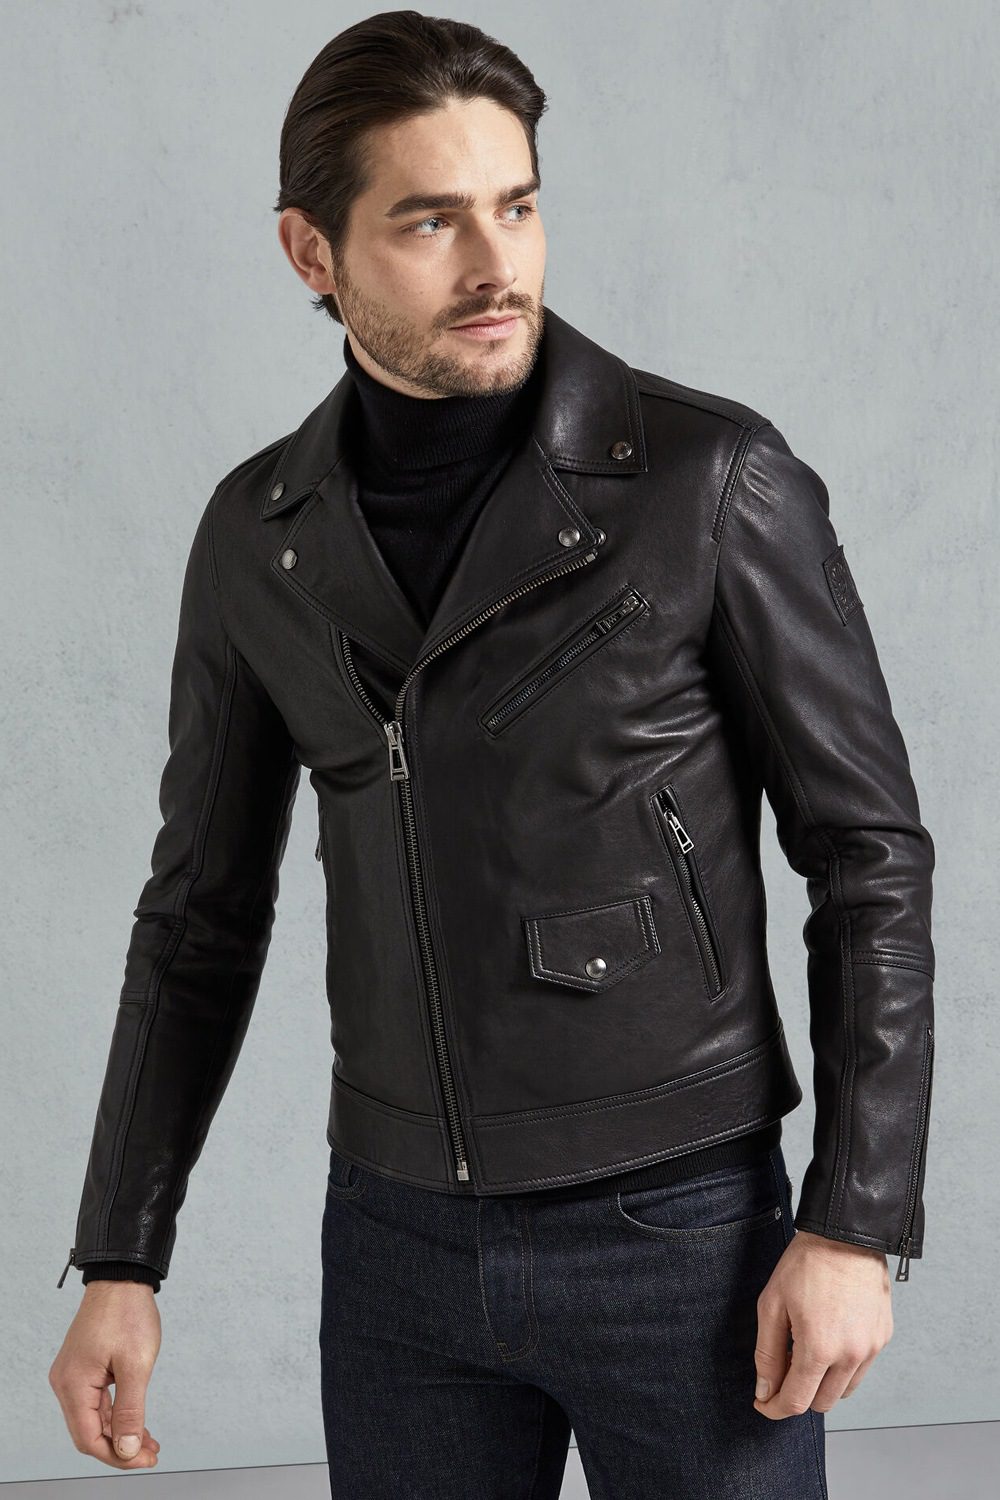 Criminal Compliance to Lure The Best Leather Jacket Brands For Men In 2022